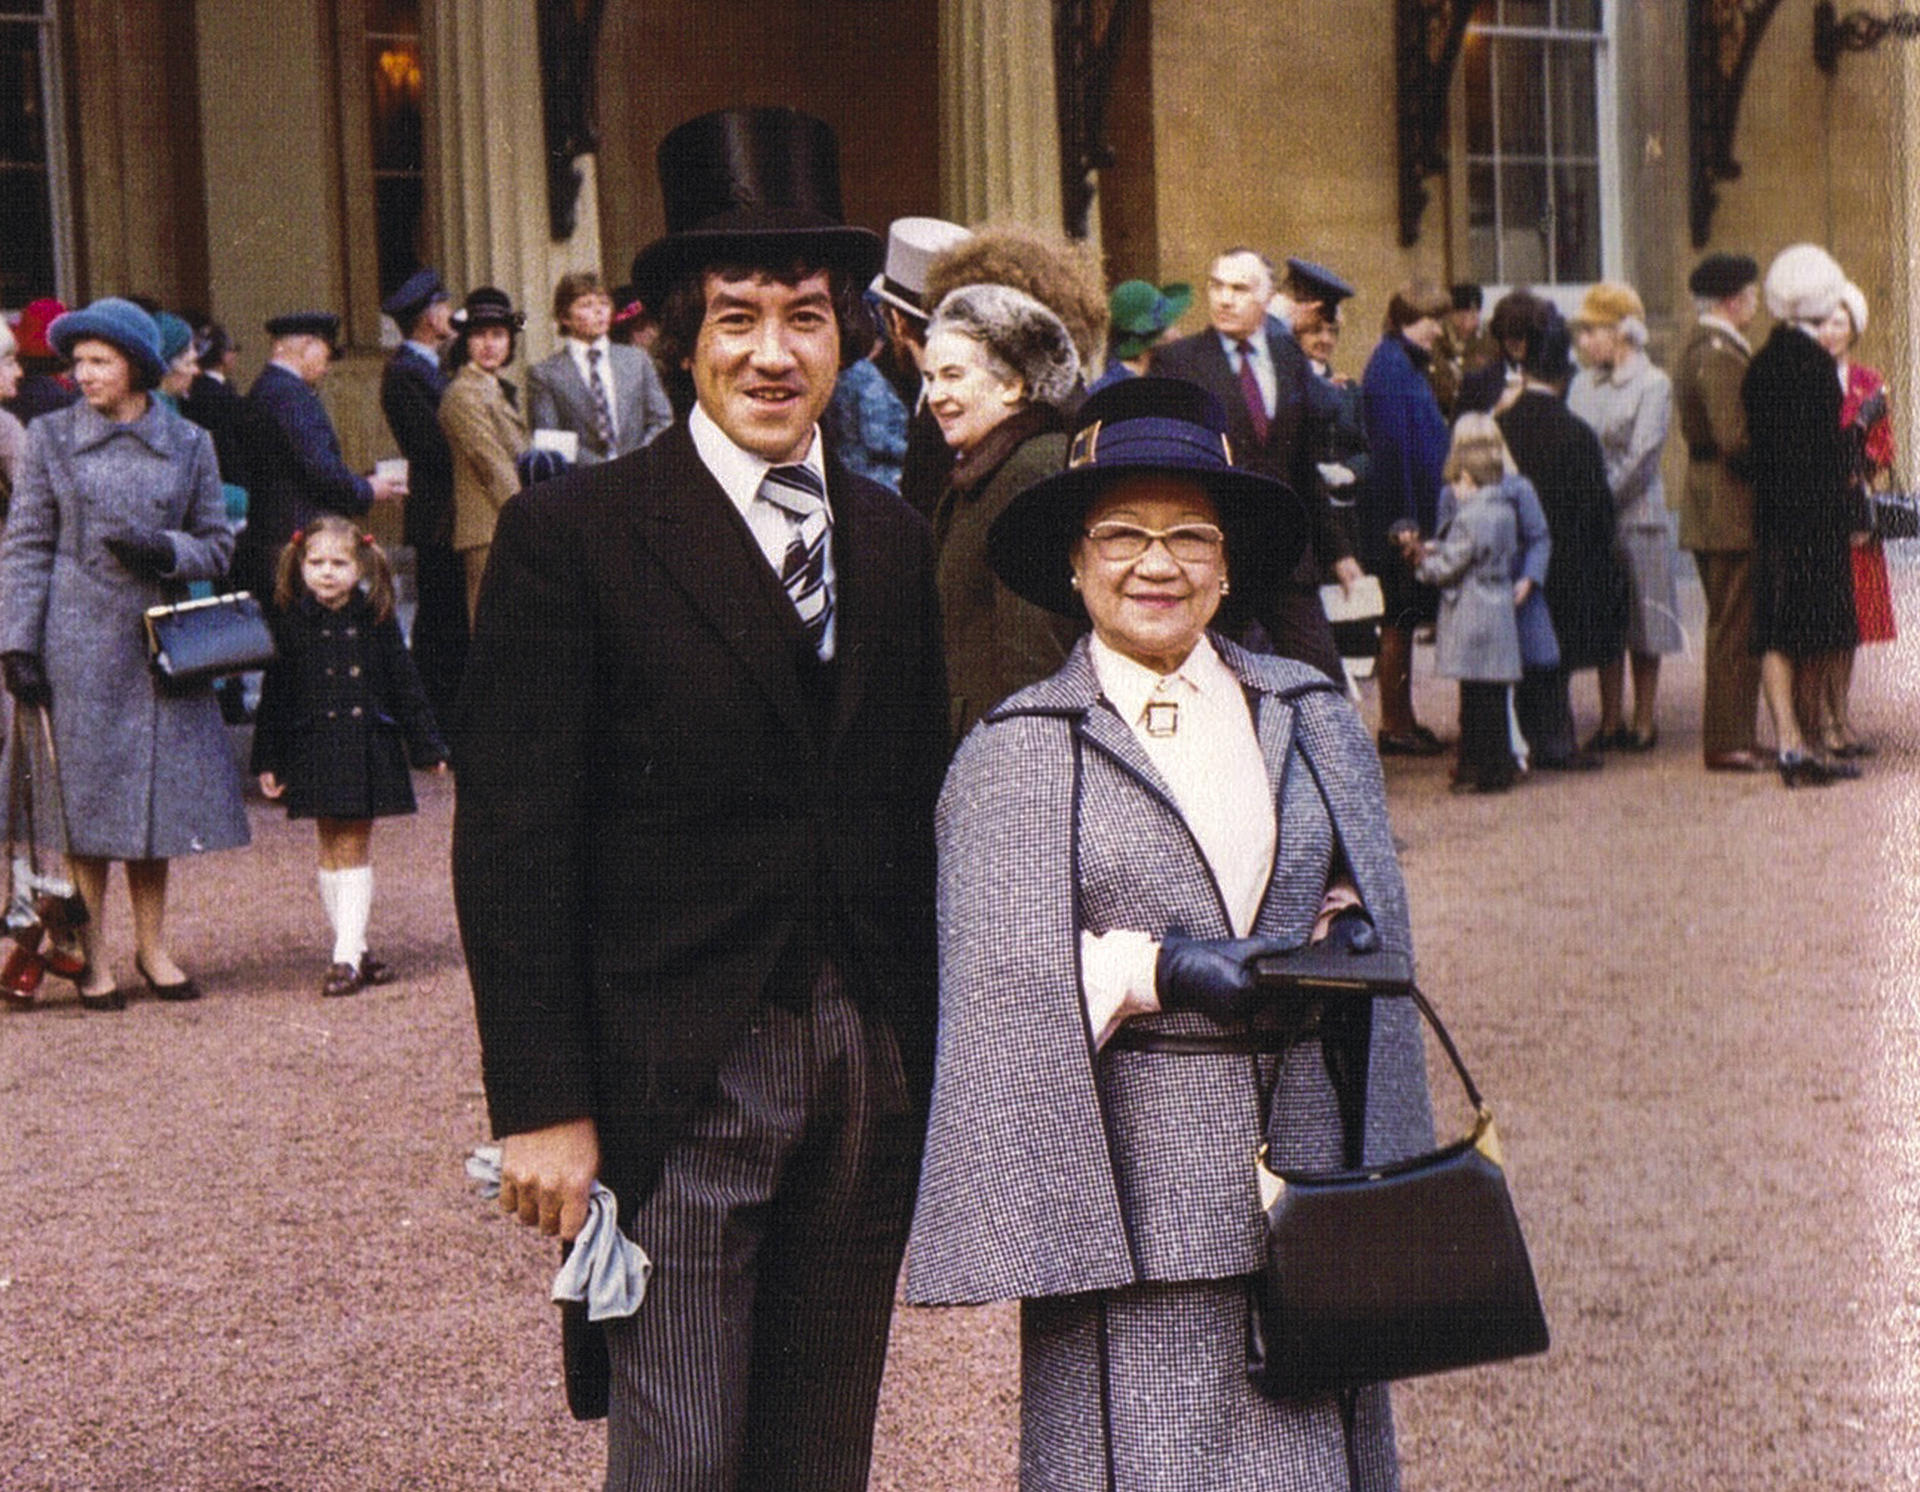 Writer Ian Gill with his mother, Louise Mary Gill, at London’s Buckingham Palace, in 1977, to receive her MBE. Photos: courtesy of the Gill family